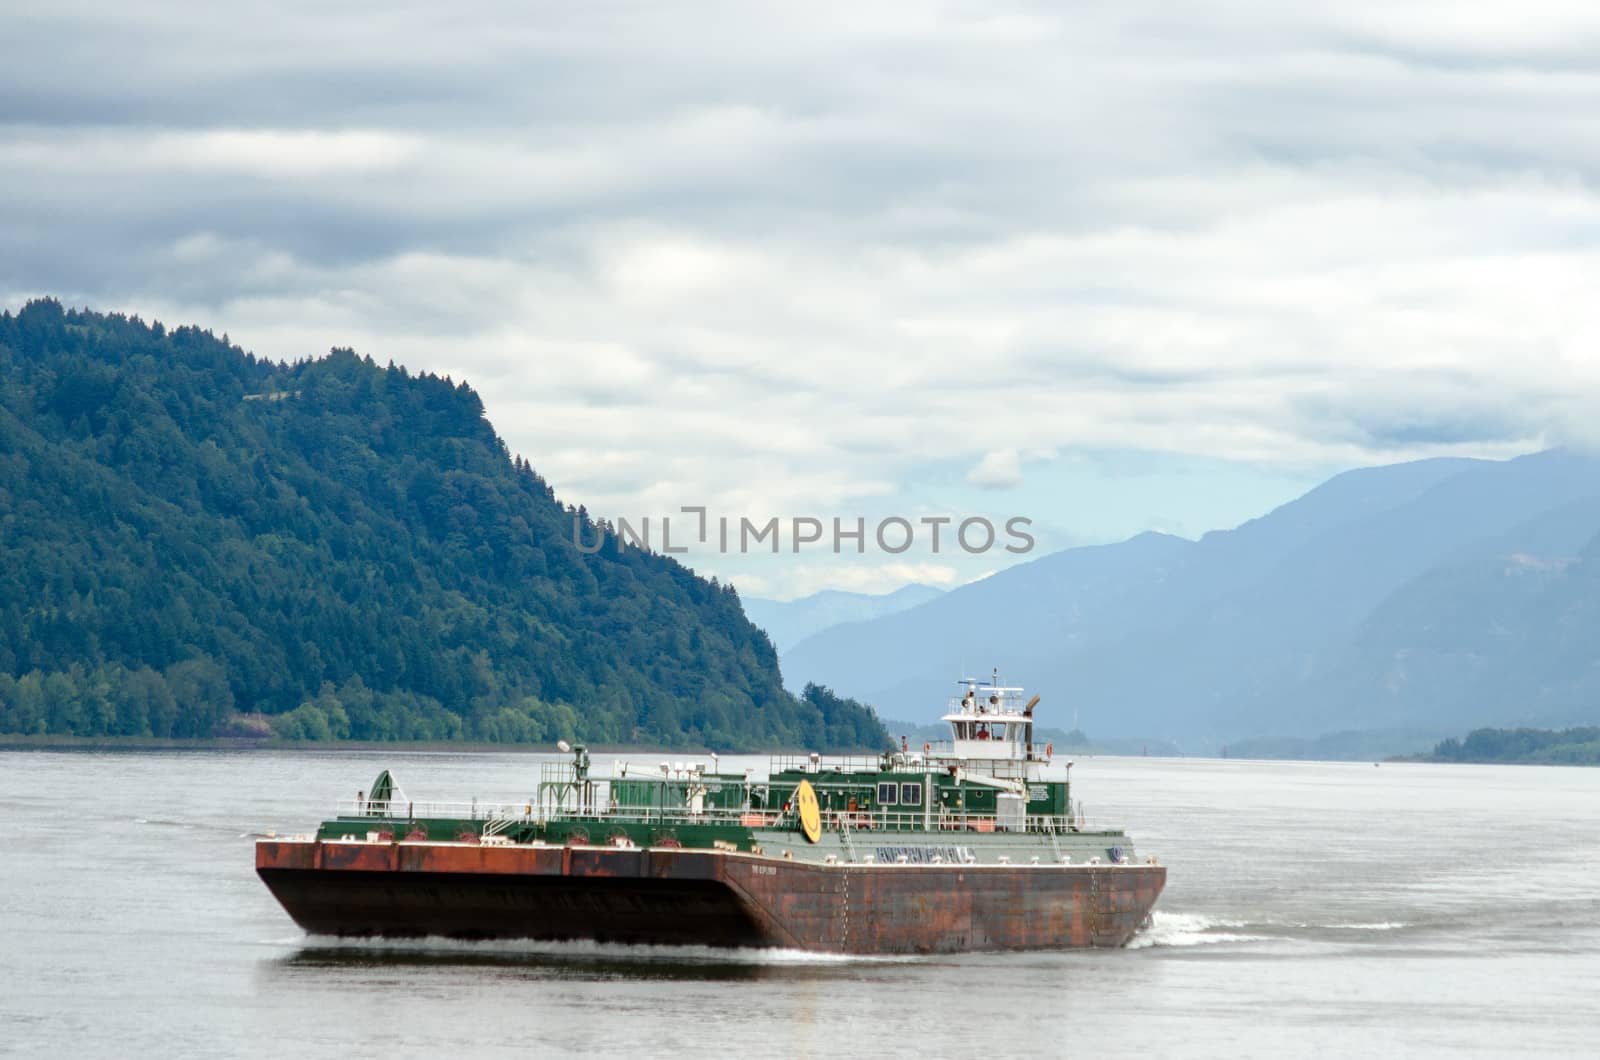 A Barge moving through the Columbia River Gorge